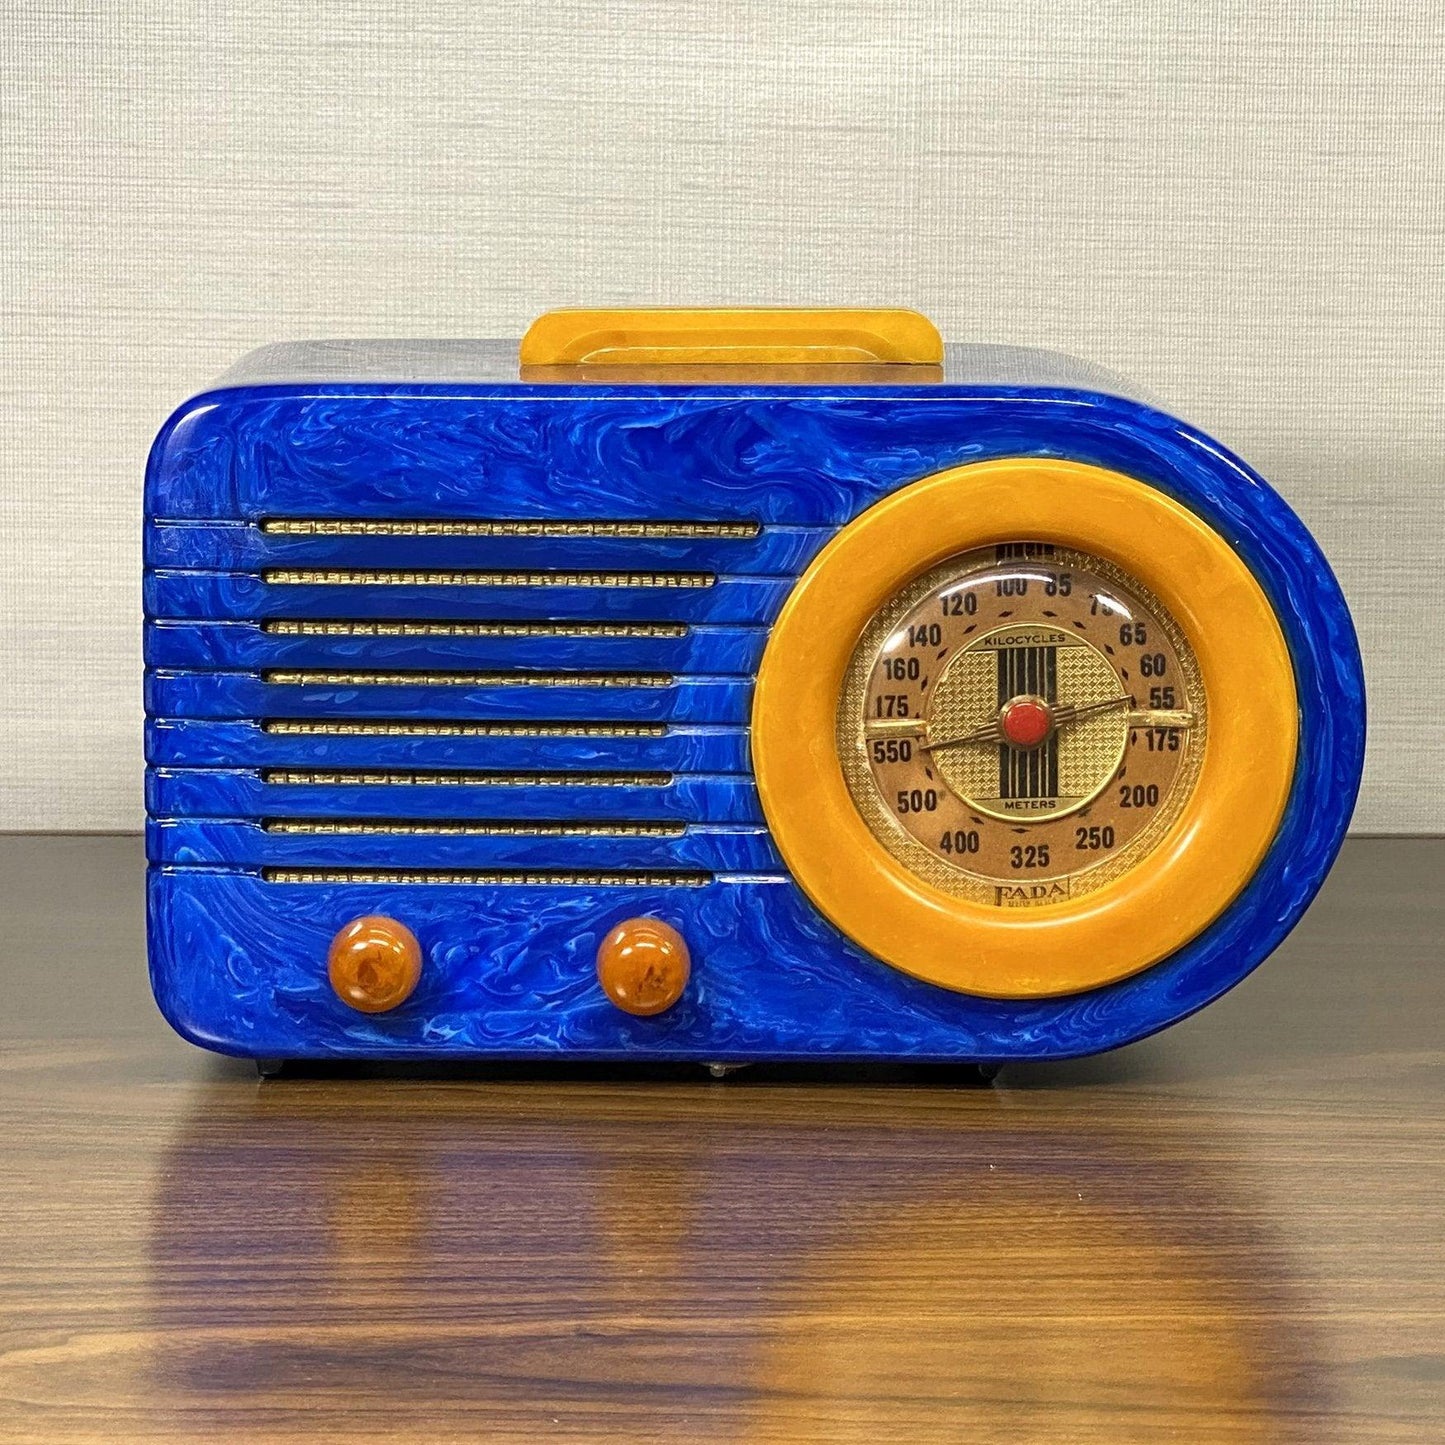 FADA 115 Bullet Catalin Radio- Blue with White Swirling